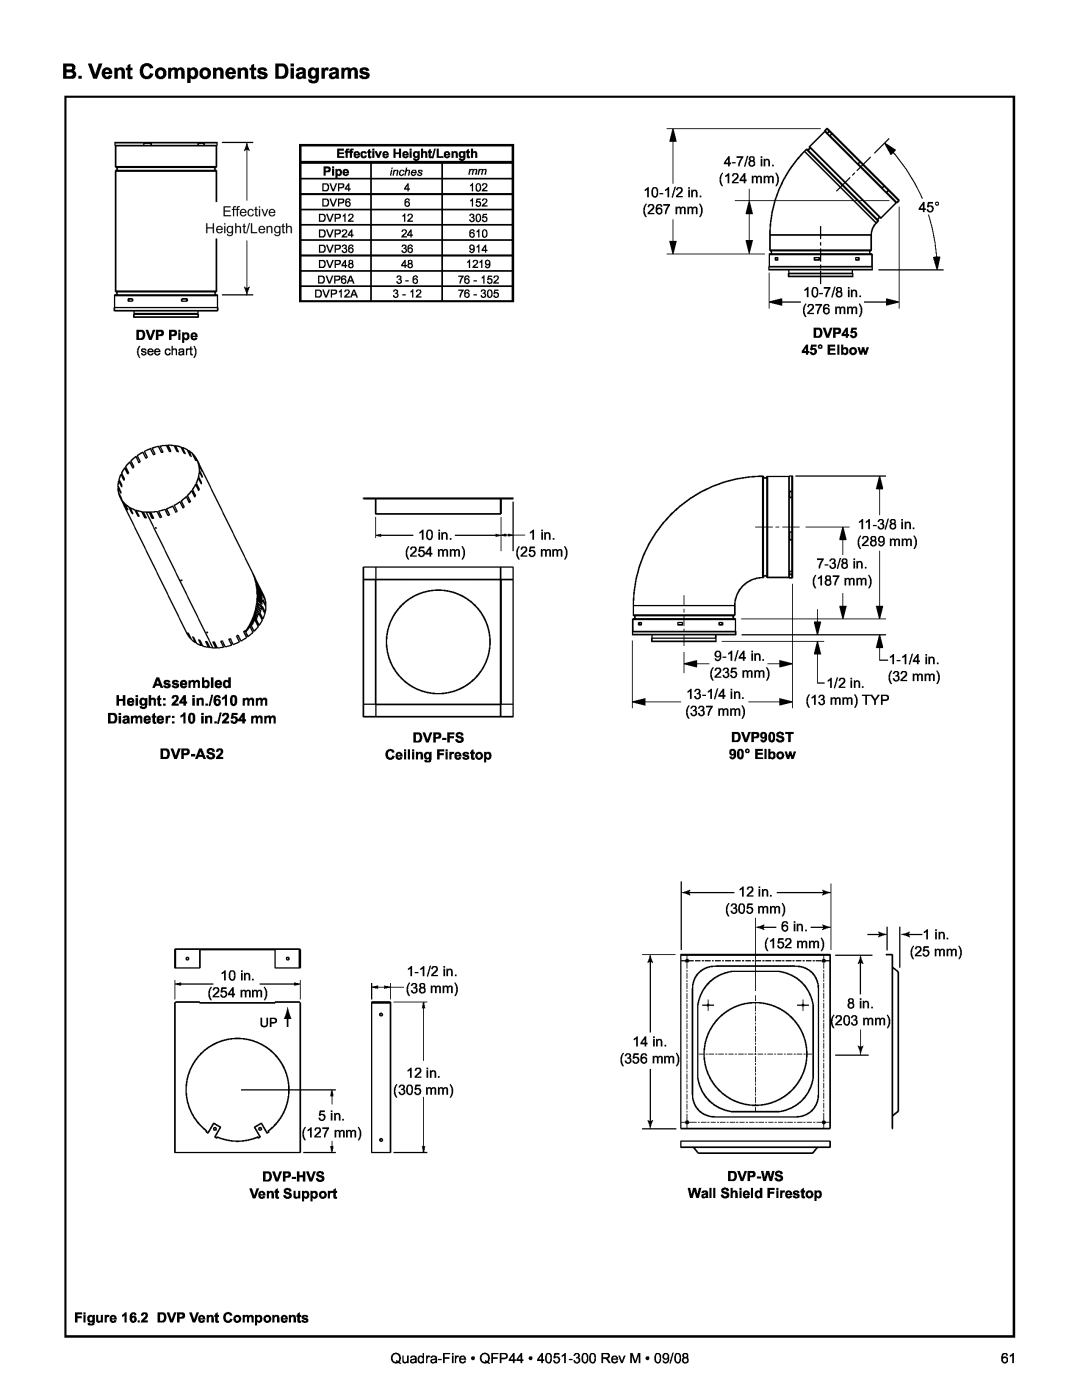 Quadra-Fire QFP44 B. Vent Components Diagrams, 4-7/8in, 124 mm, 10-1/2in, 267 mm, Height/Length, 10-7/8in, 276 mm, DVP45 